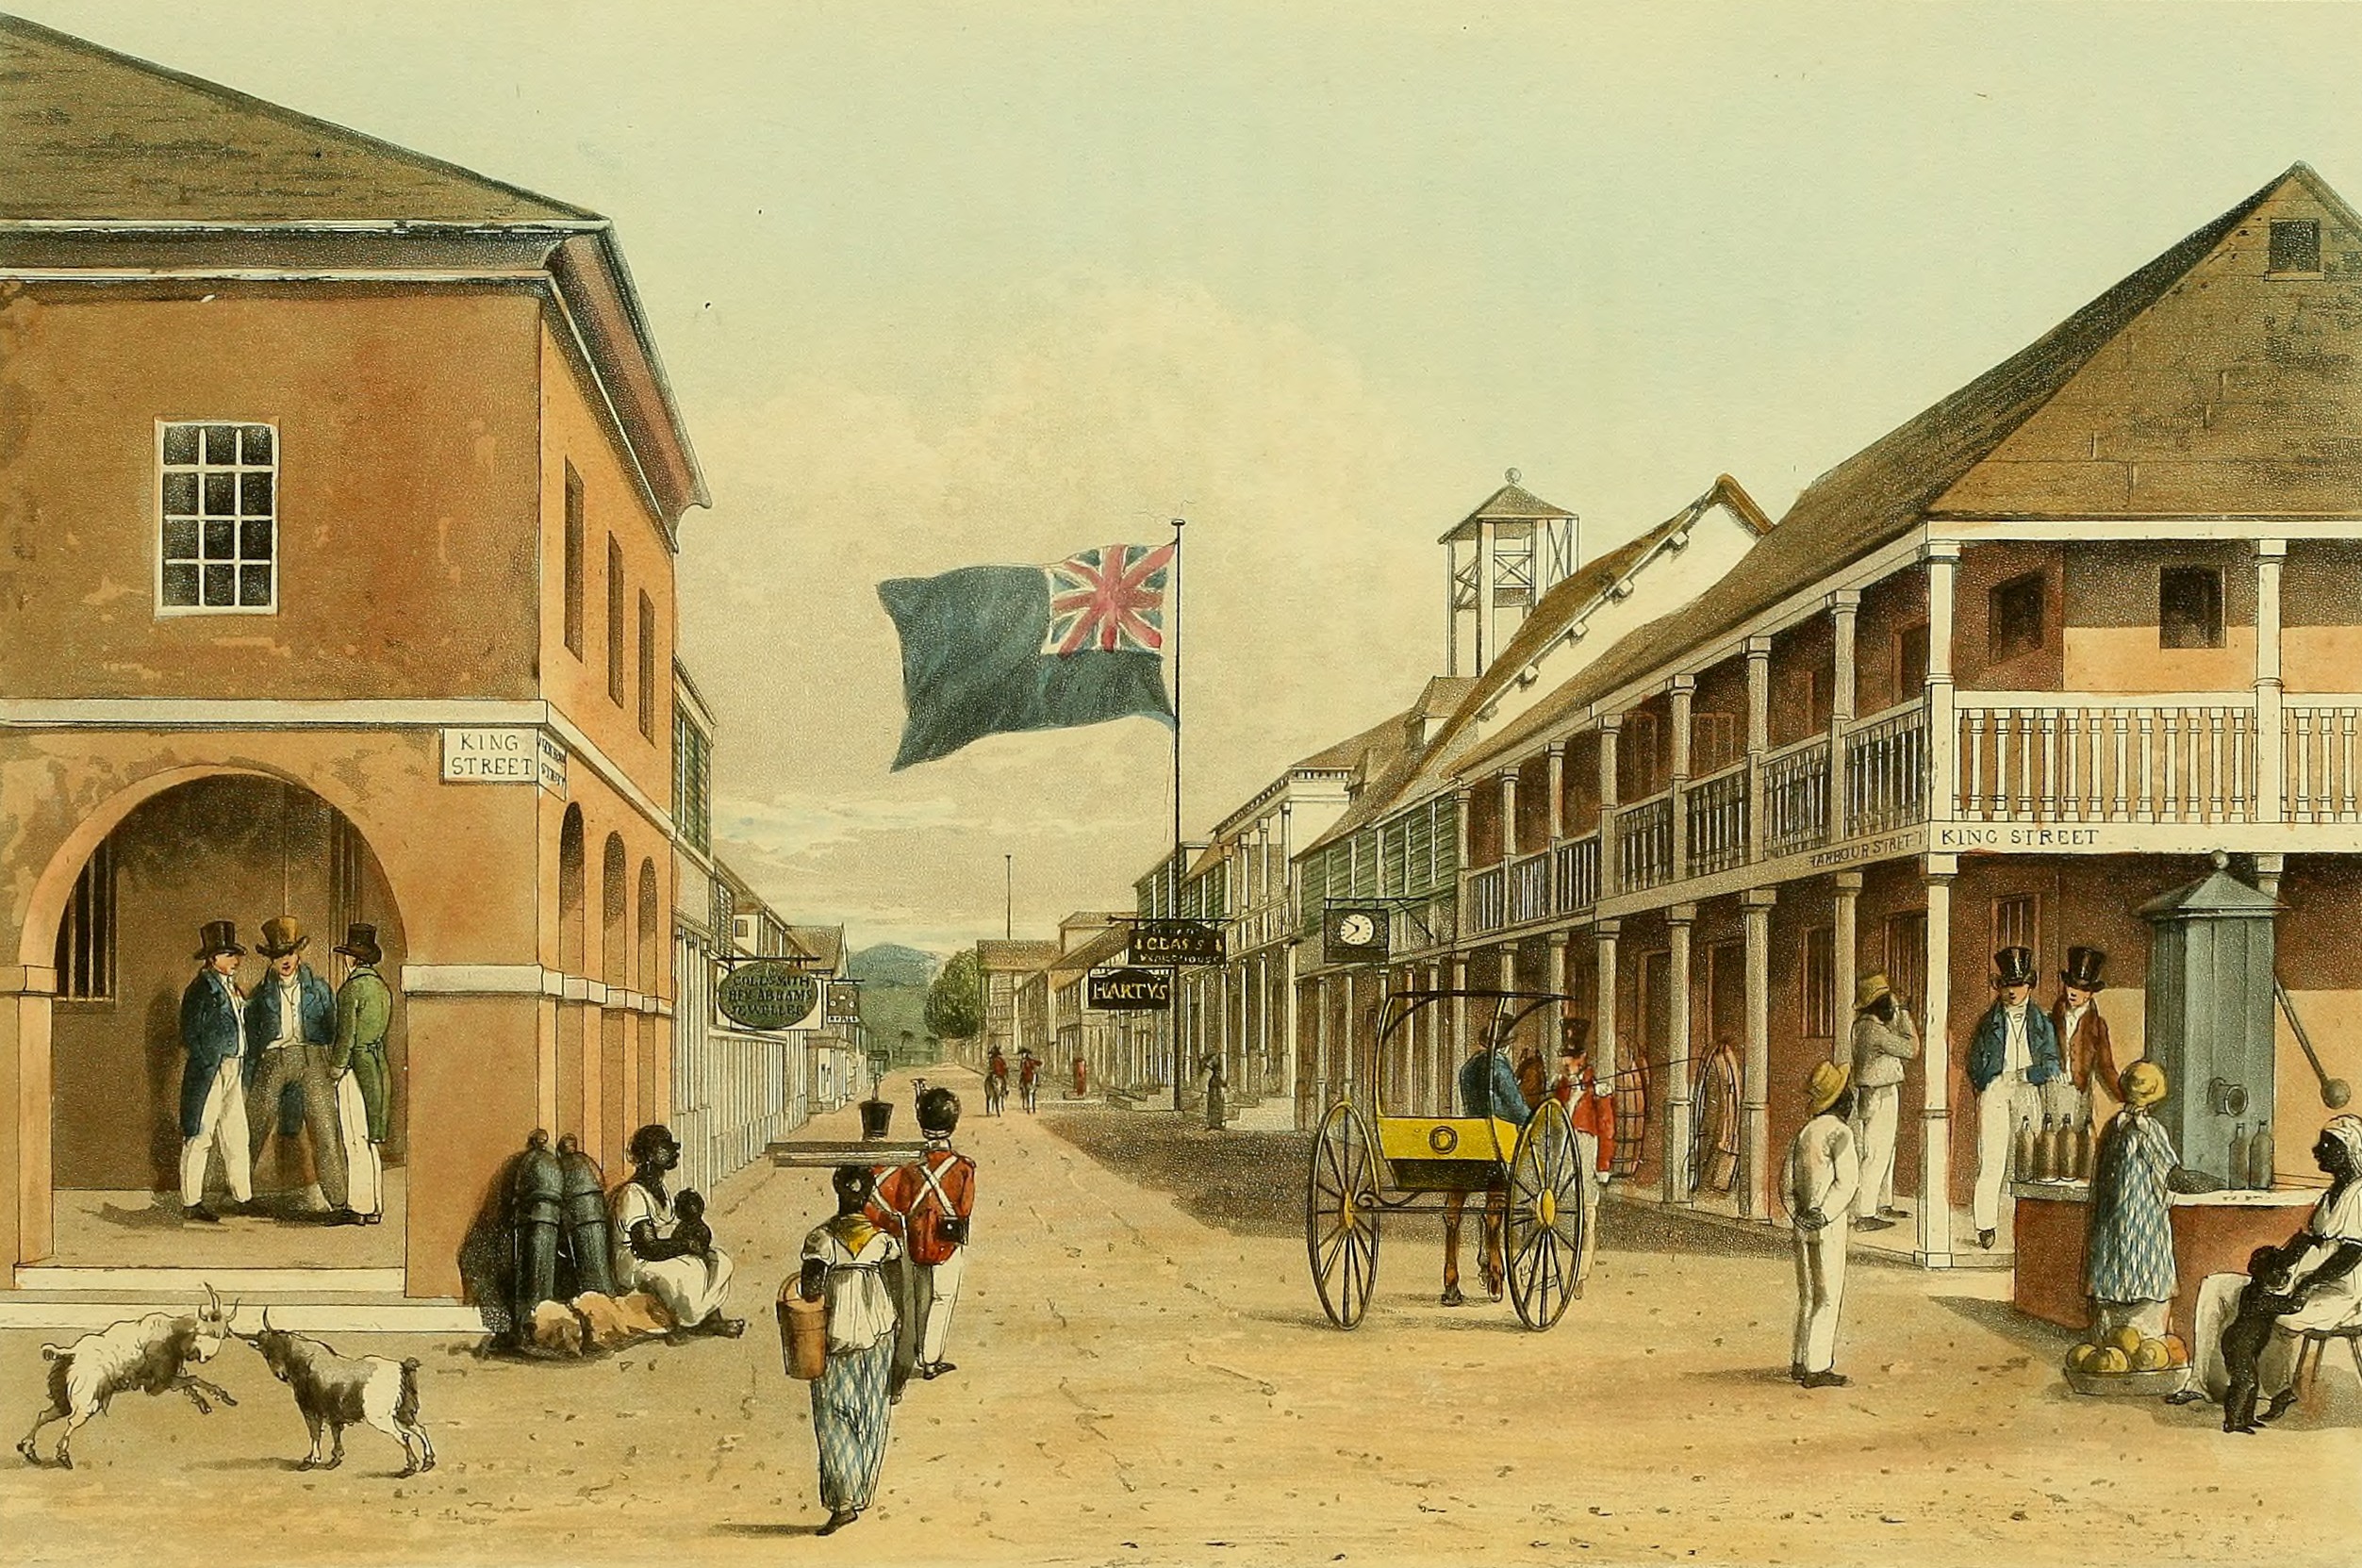 A view of Harbour Street, Kingston in Jamaica during the 1820s while colonized by the British.